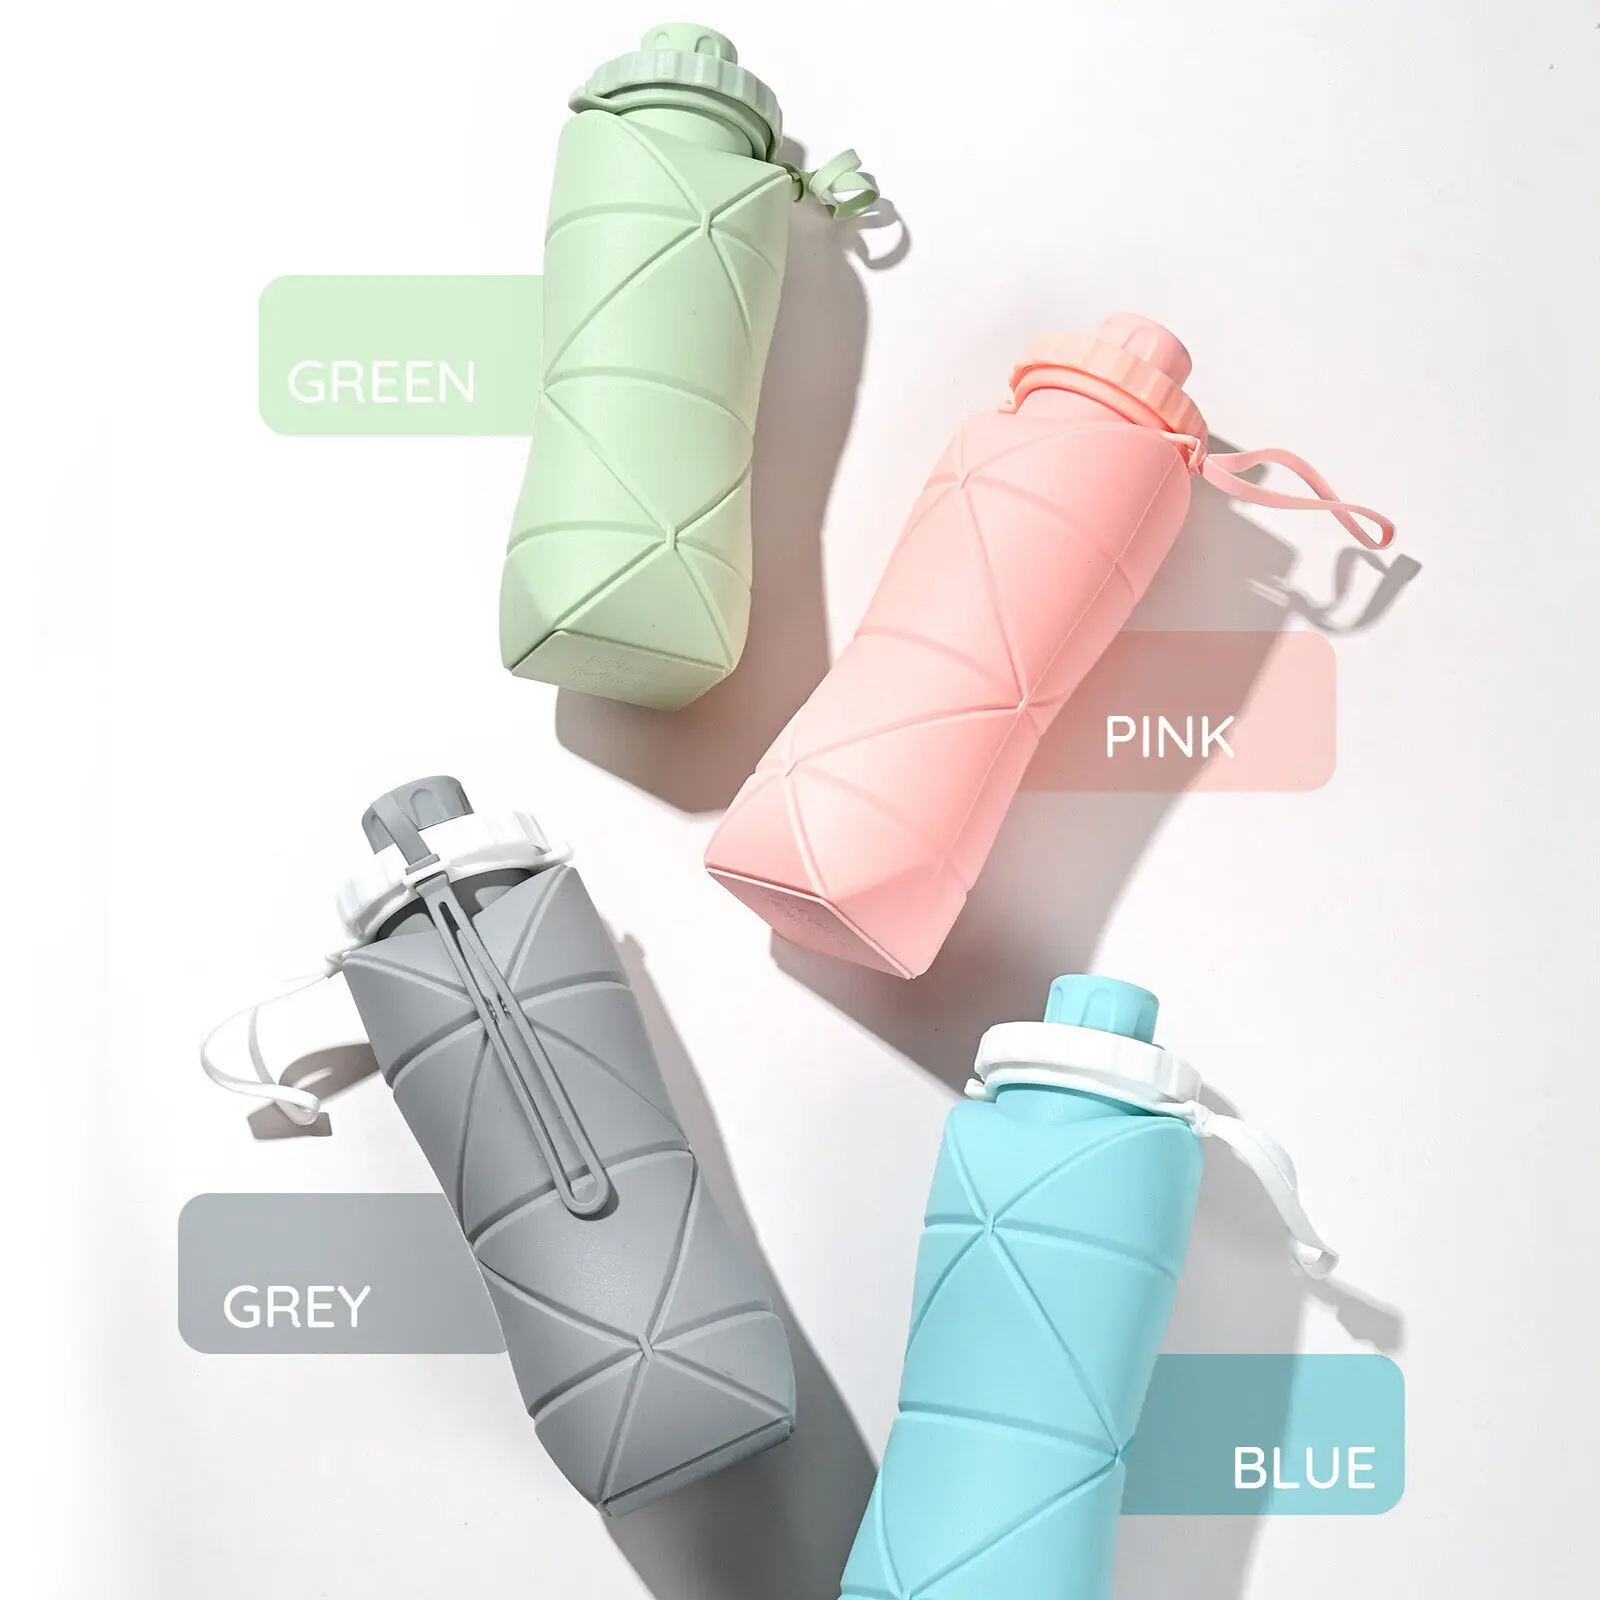 Foldable Water Bottle High Quality Silicon Water Bottle Portable Reusable BPA Free Silicone Foldable Travel Water Bottle